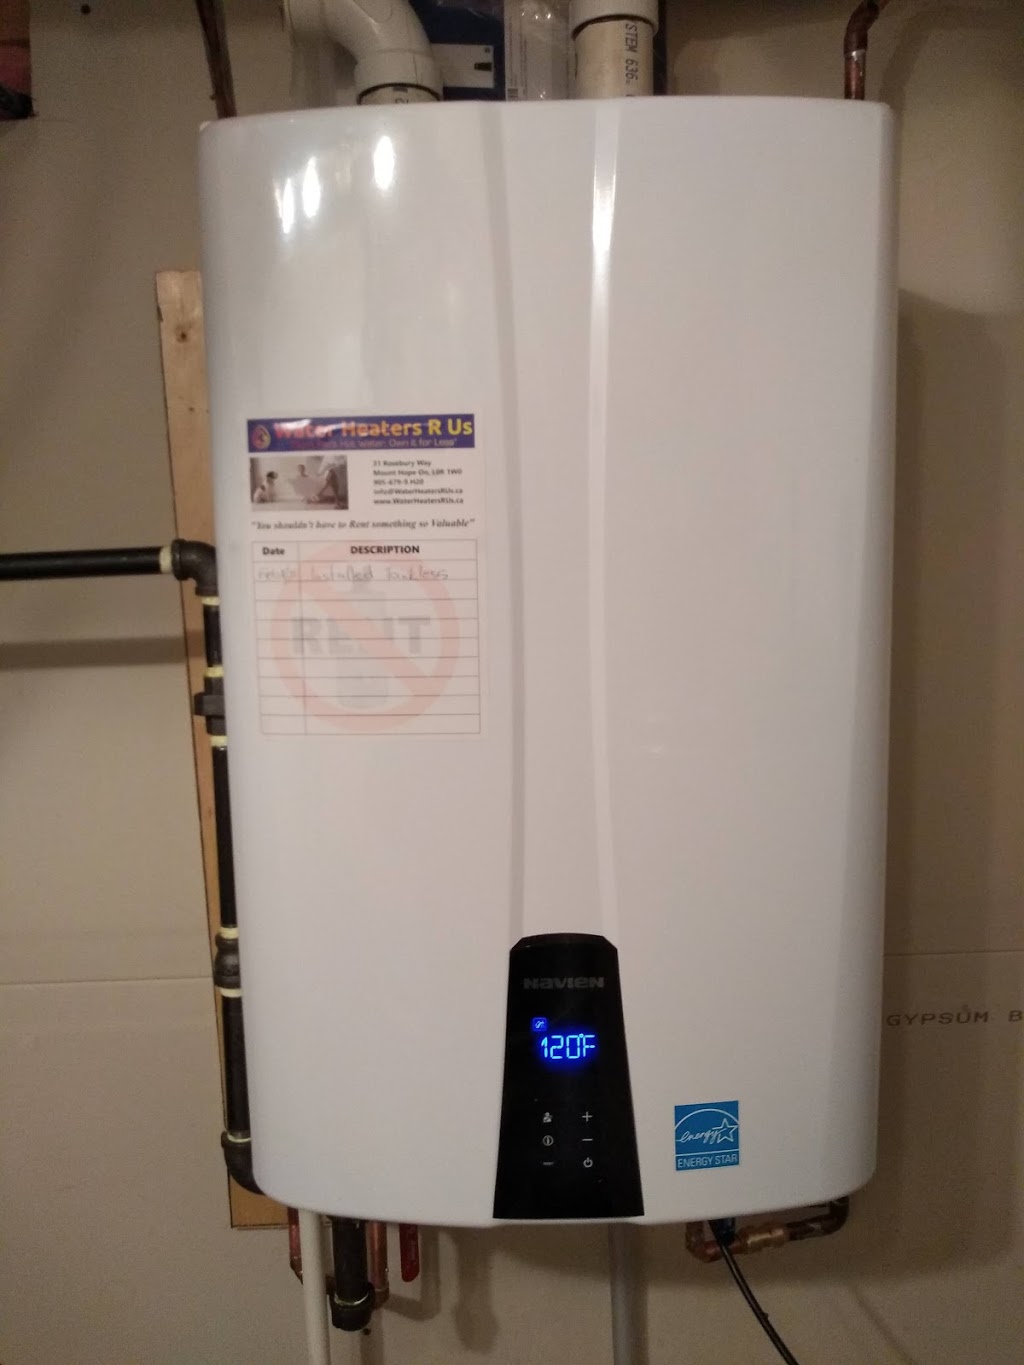 Water Heaters R US | Mount Hope, ON L0R 1W0, Canada | Phone: (905) 679-9420